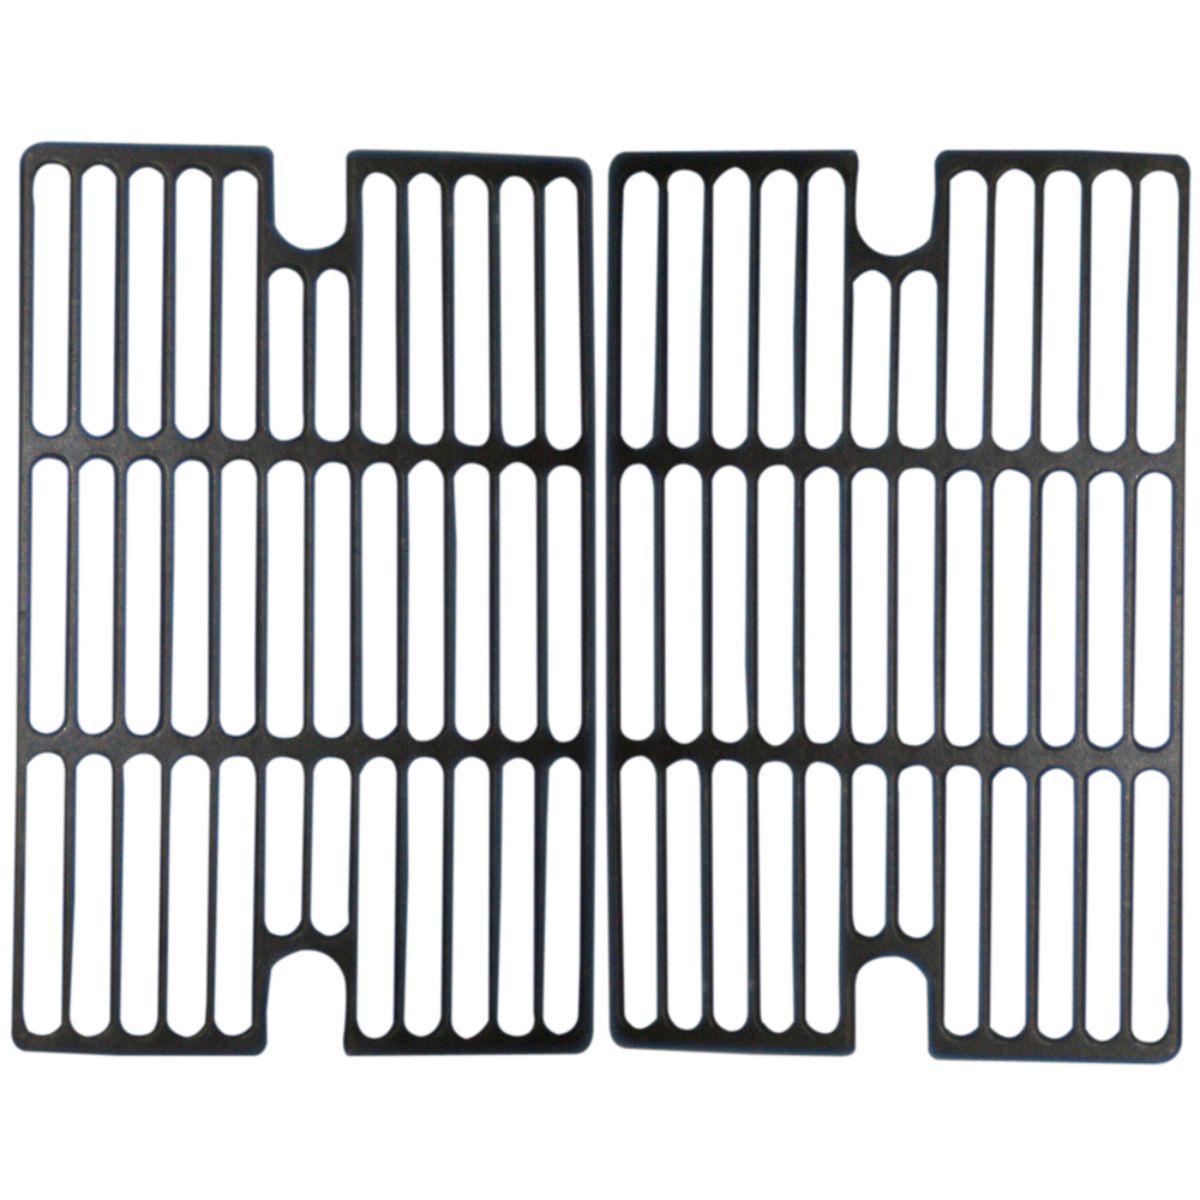 Matte cast iron cooking grid for Outdoor Gourmet, Smoke Hollow brand gas grills